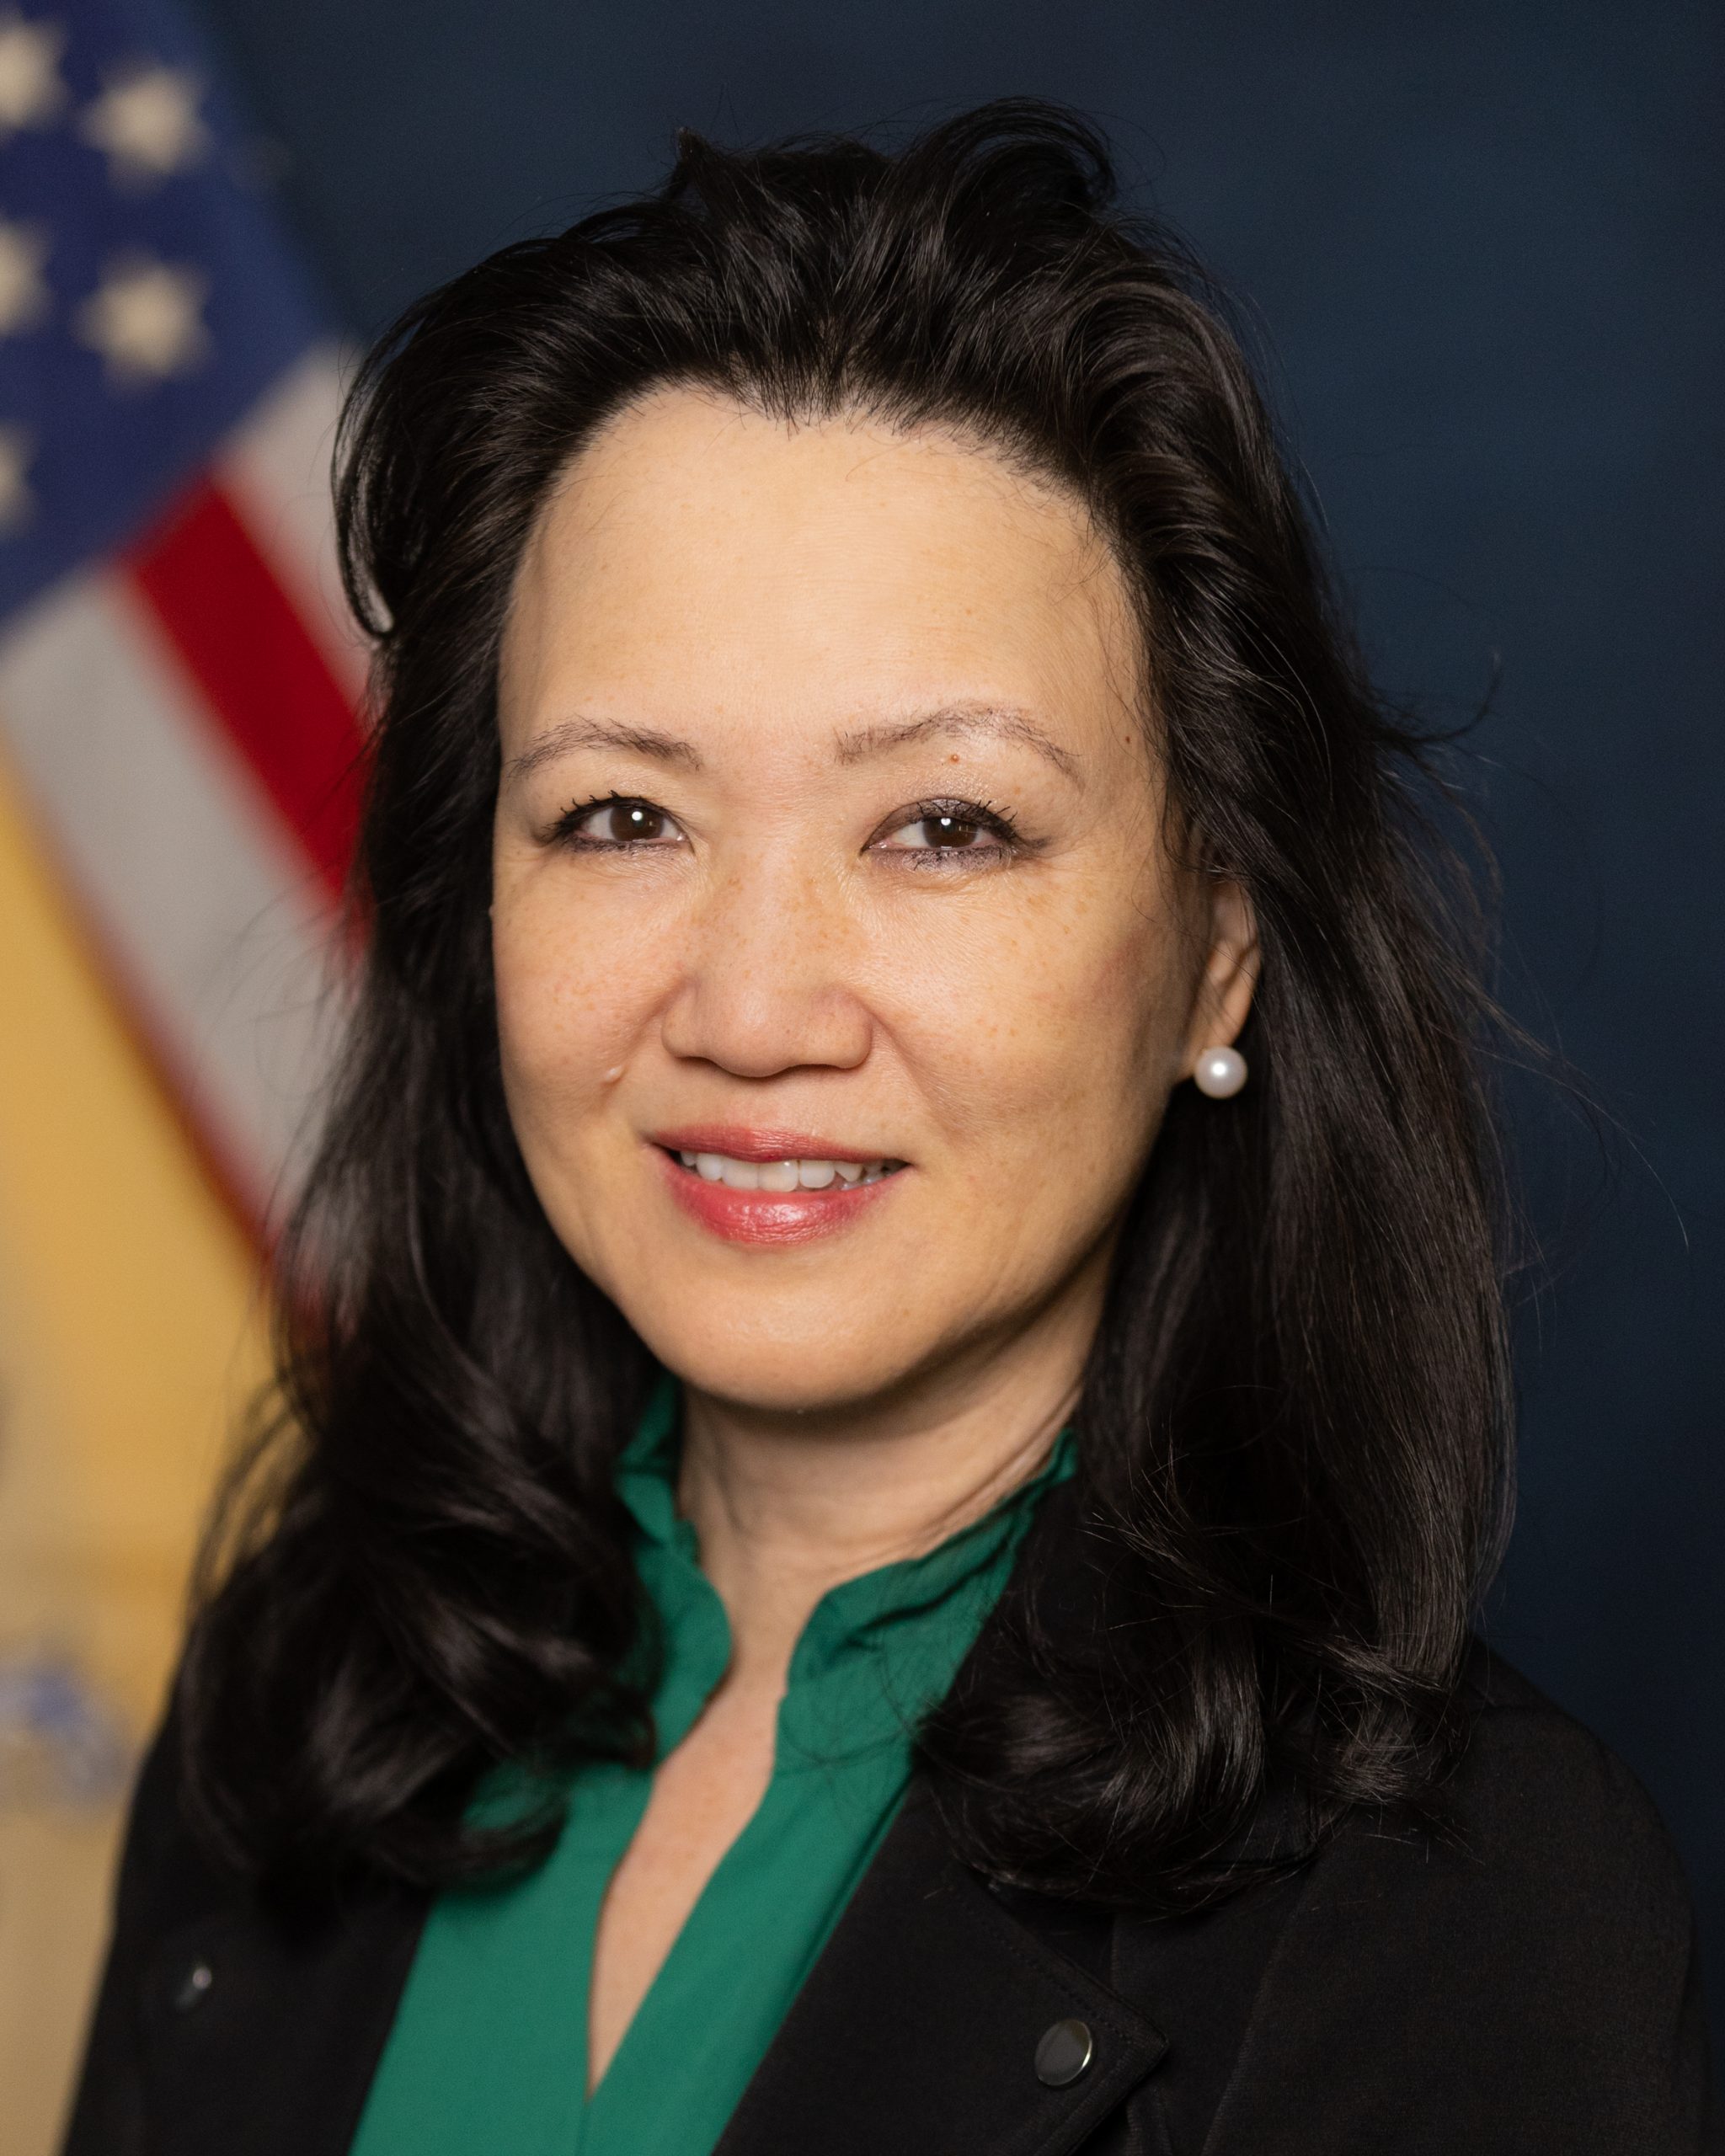 </p>
<h3 style="color:white;">Miae Park</h3>
<h5 style="color:white;font-style:italic;">Assistant Attorney General/Senior Counsel to the Attorney General</h5>
<p>